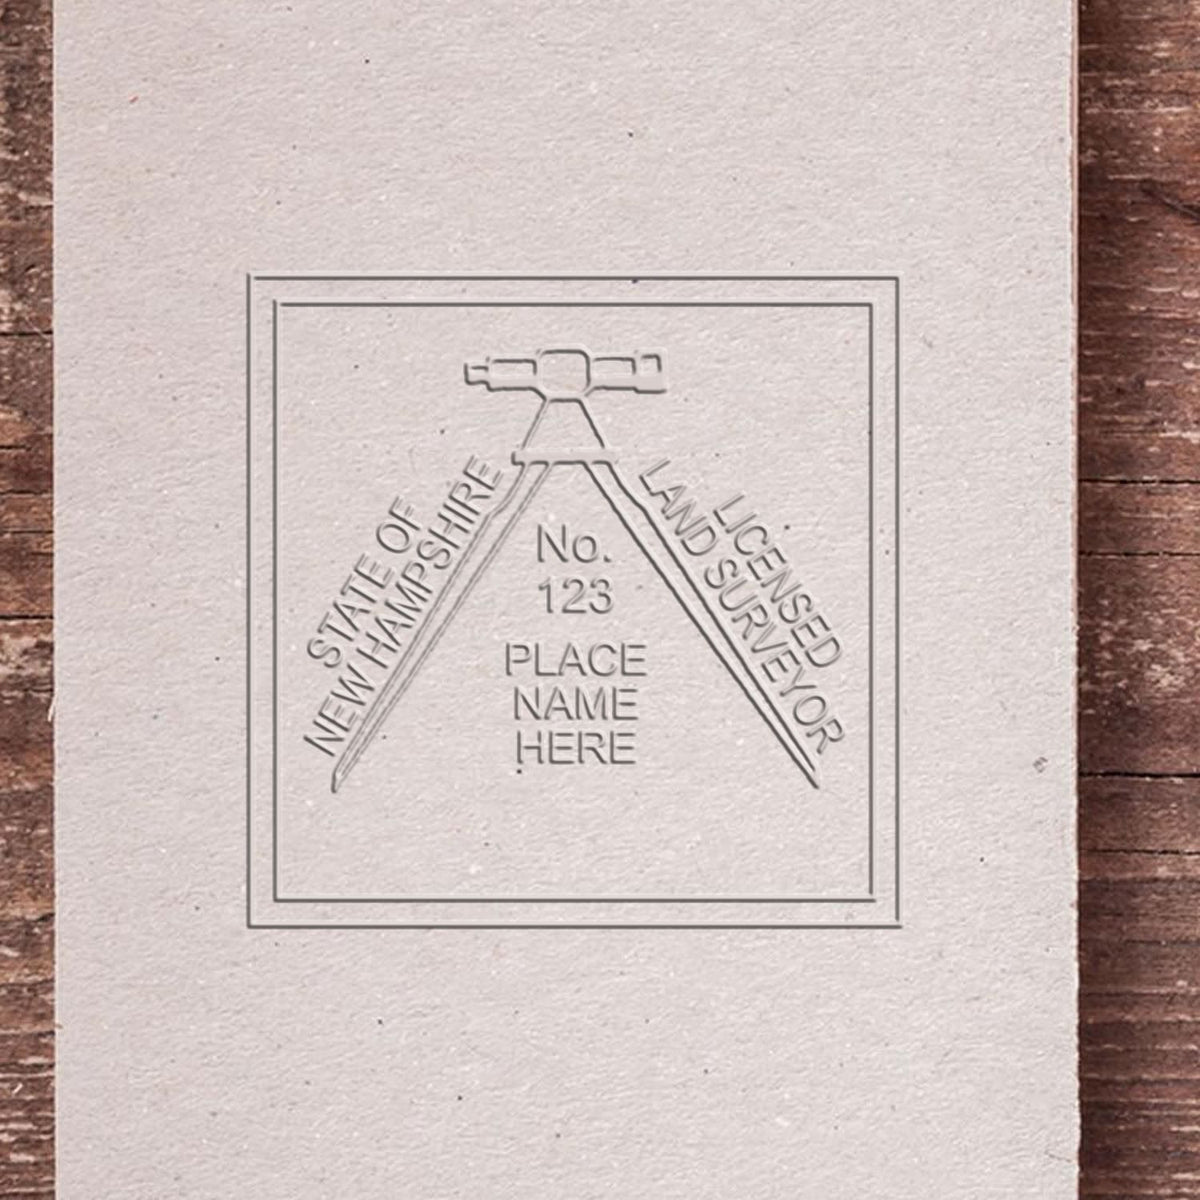 The Gift New Hampshire Land Surveyor Seal stamp impression comes to life with a crisp, detailed image stamped on paper - showcasing true professional quality.